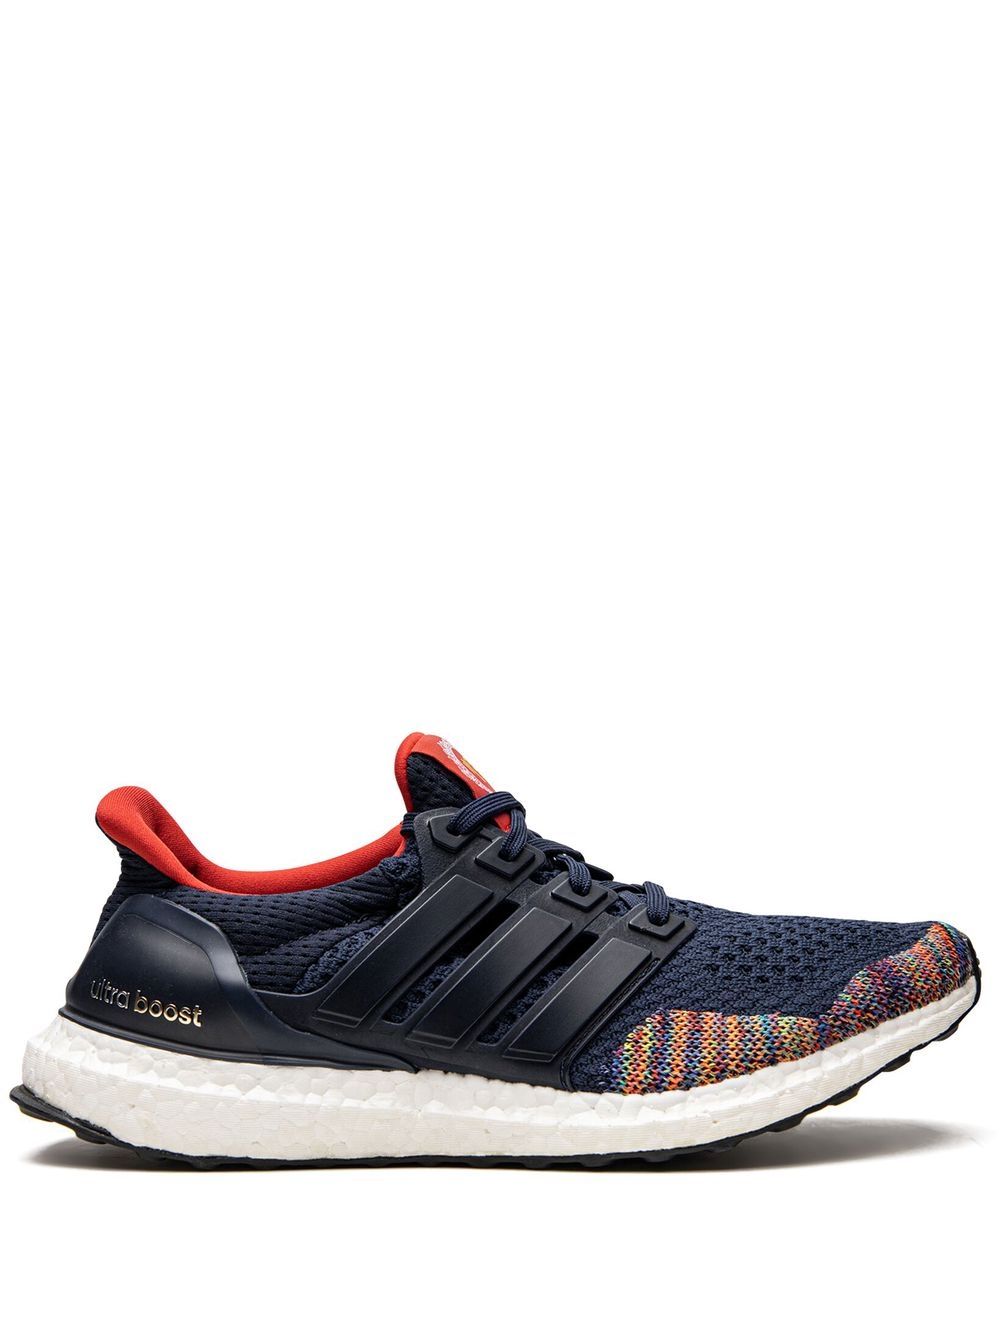 adidas Ultraboost "Chinese New Year" sneakers - Blue von adidas